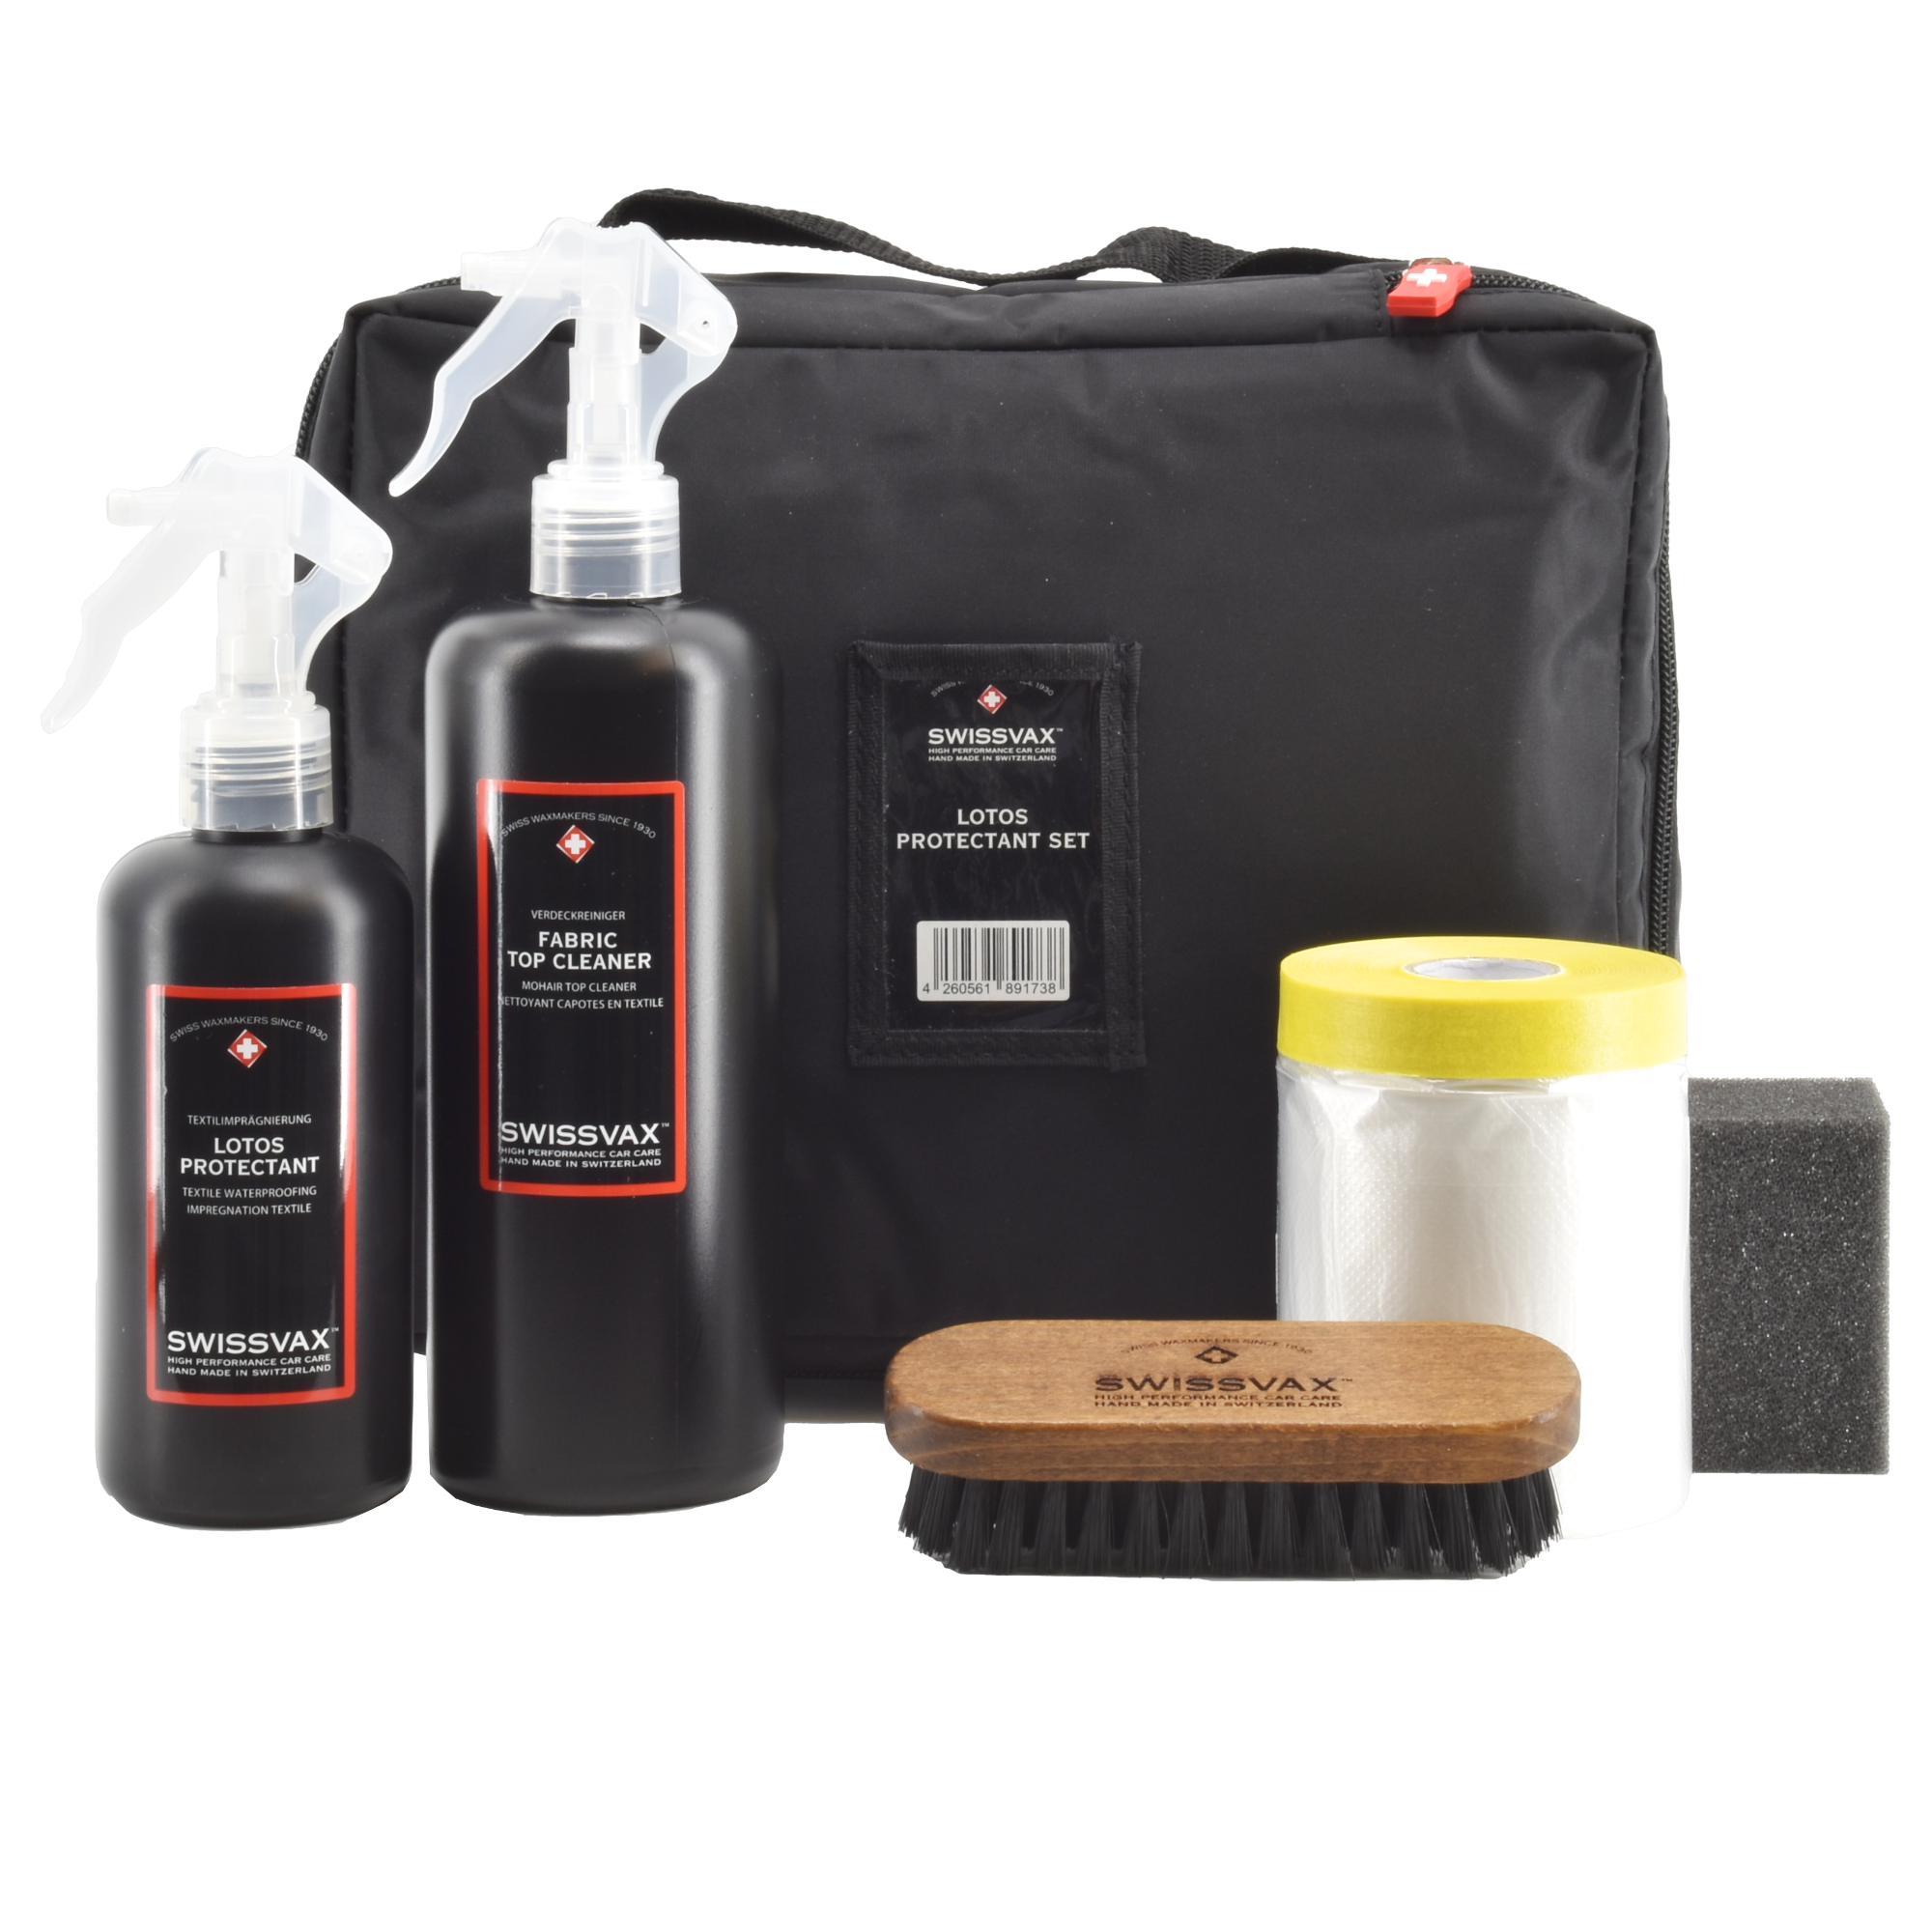 Swissvax LOTOS PROTECTANT KIT for cleaning and sealing fabric roofs and textiles/alcantara